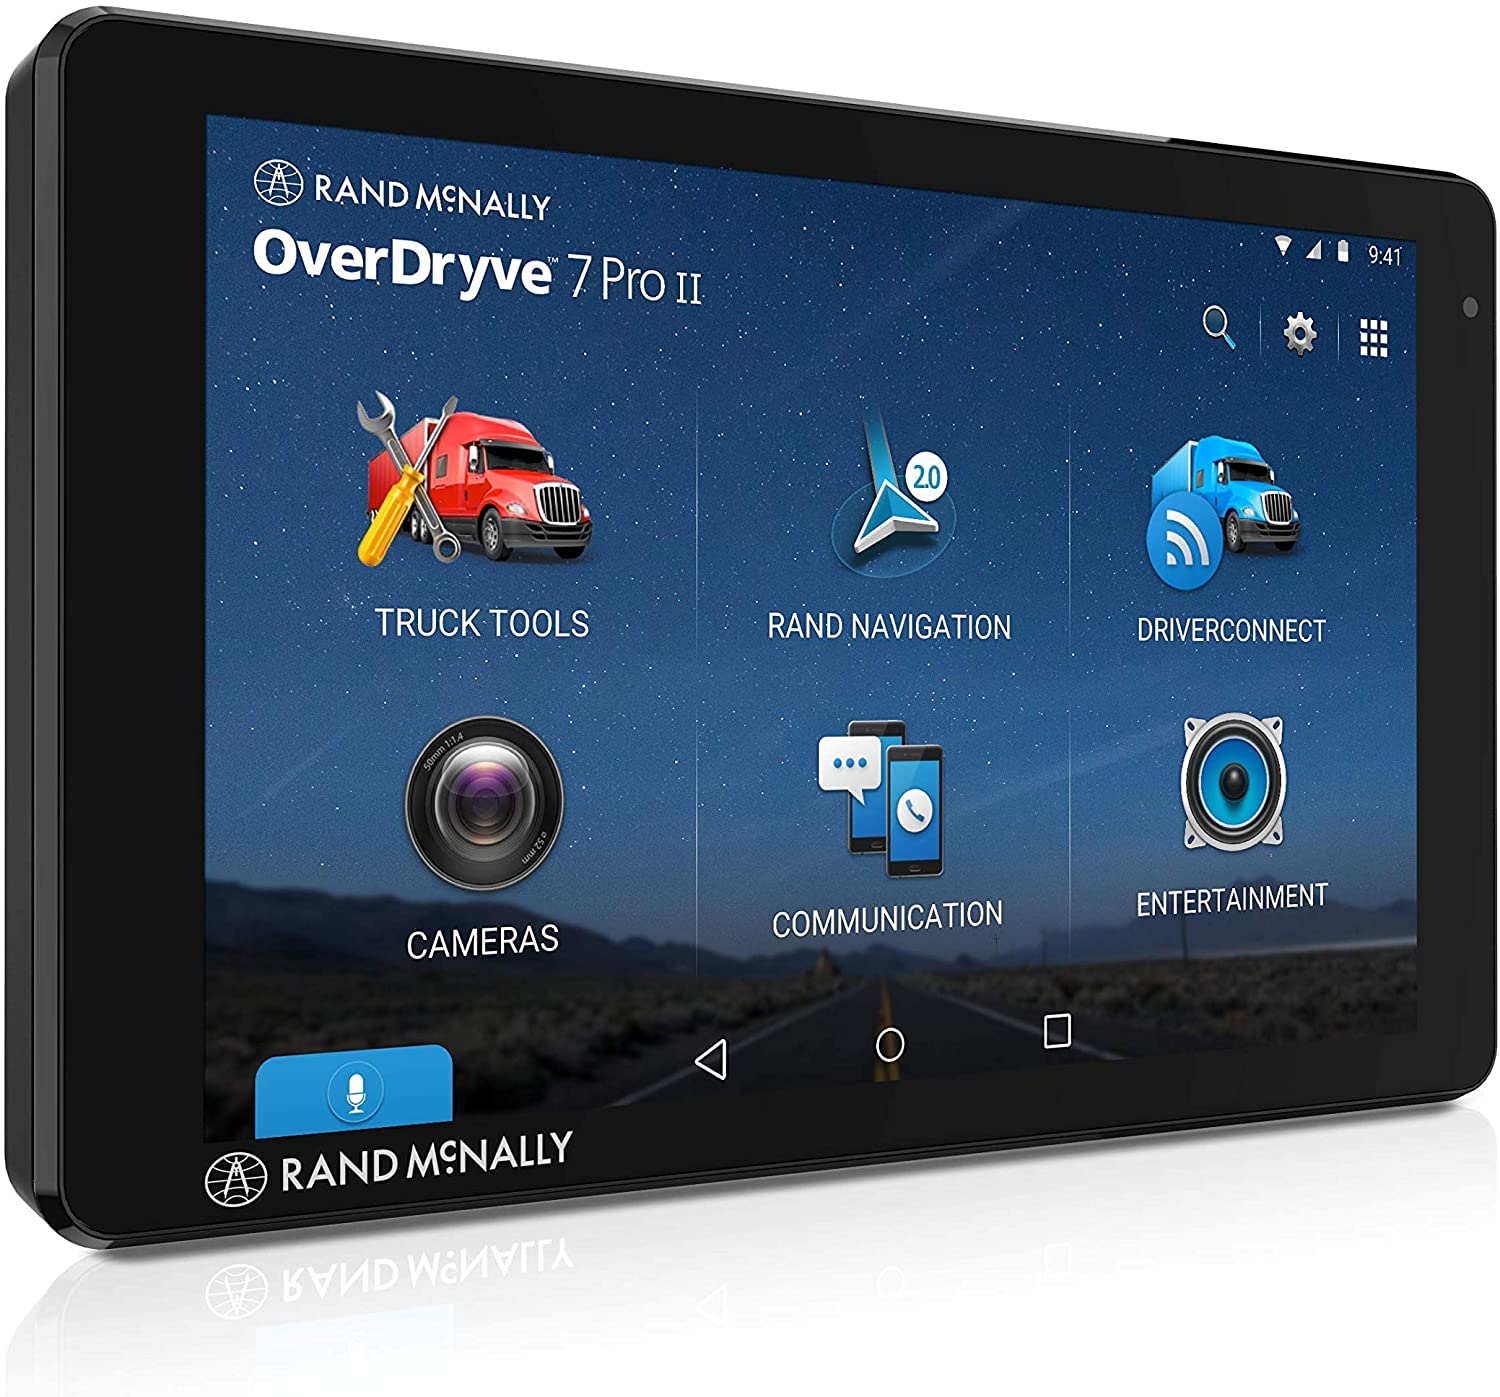 Rand McNally OverDryve 7 Pro Gen 2, 7-inch GPS Truck Tablet, Easy-to-Read Display, Dash Cam, Custom Routing, and Satellite Radio (OD7PROII) (Renewed)